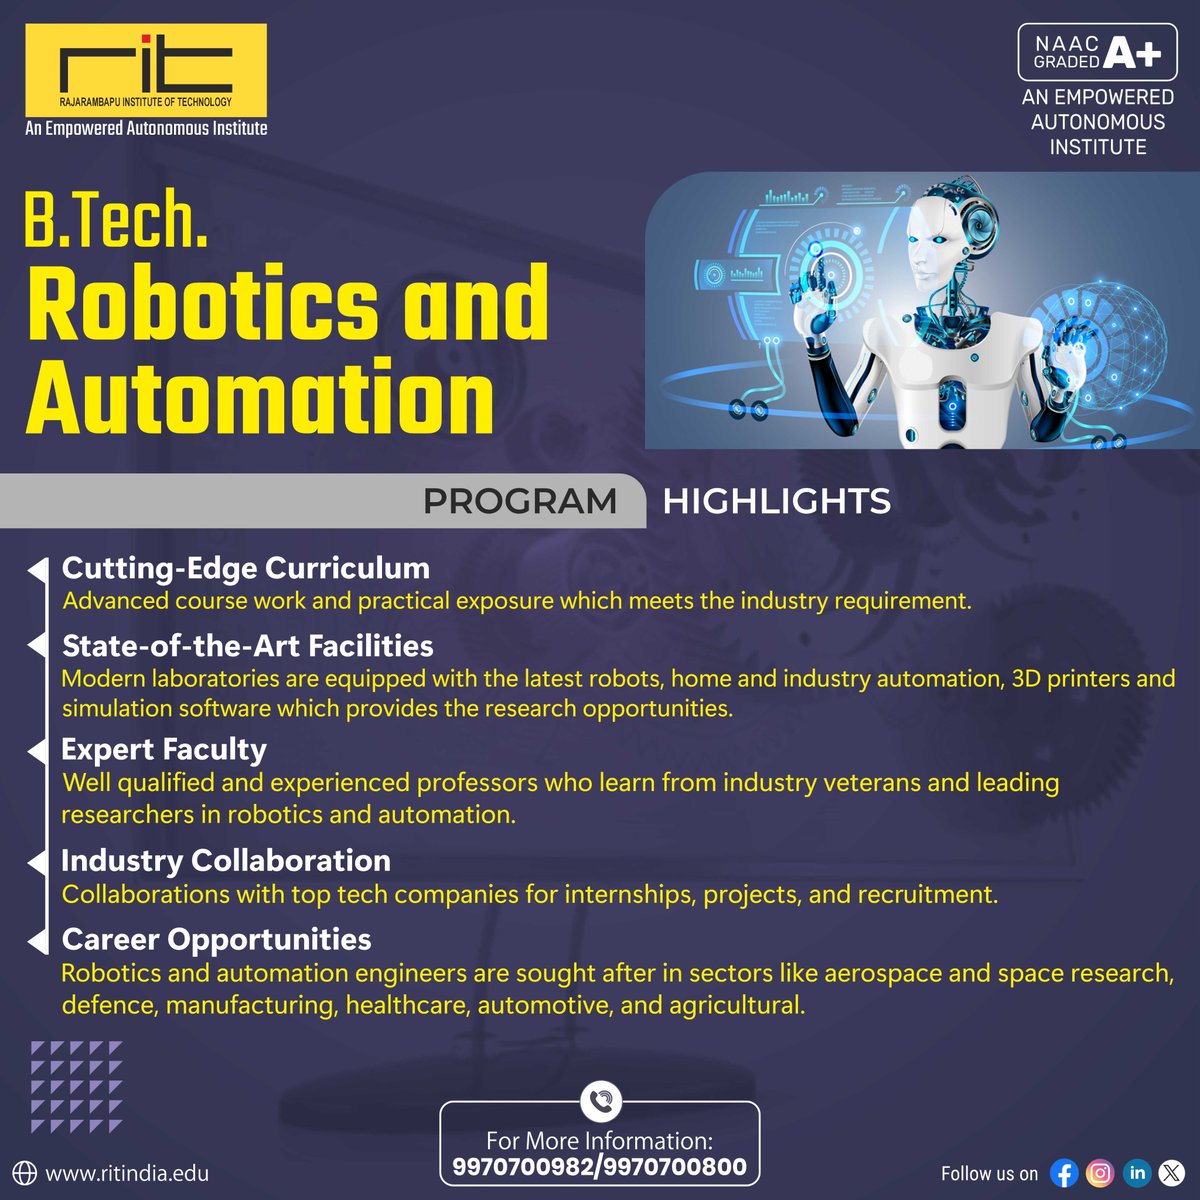 Step into the future with our Robotics and Automation program! Join us to innovate and lead in the exciting world of intelligent machines. Apply now and be at the forefront of technological advancement! 🤖🔧
Website: ritindia.edu

#EngineeringAdmissions #Robotics